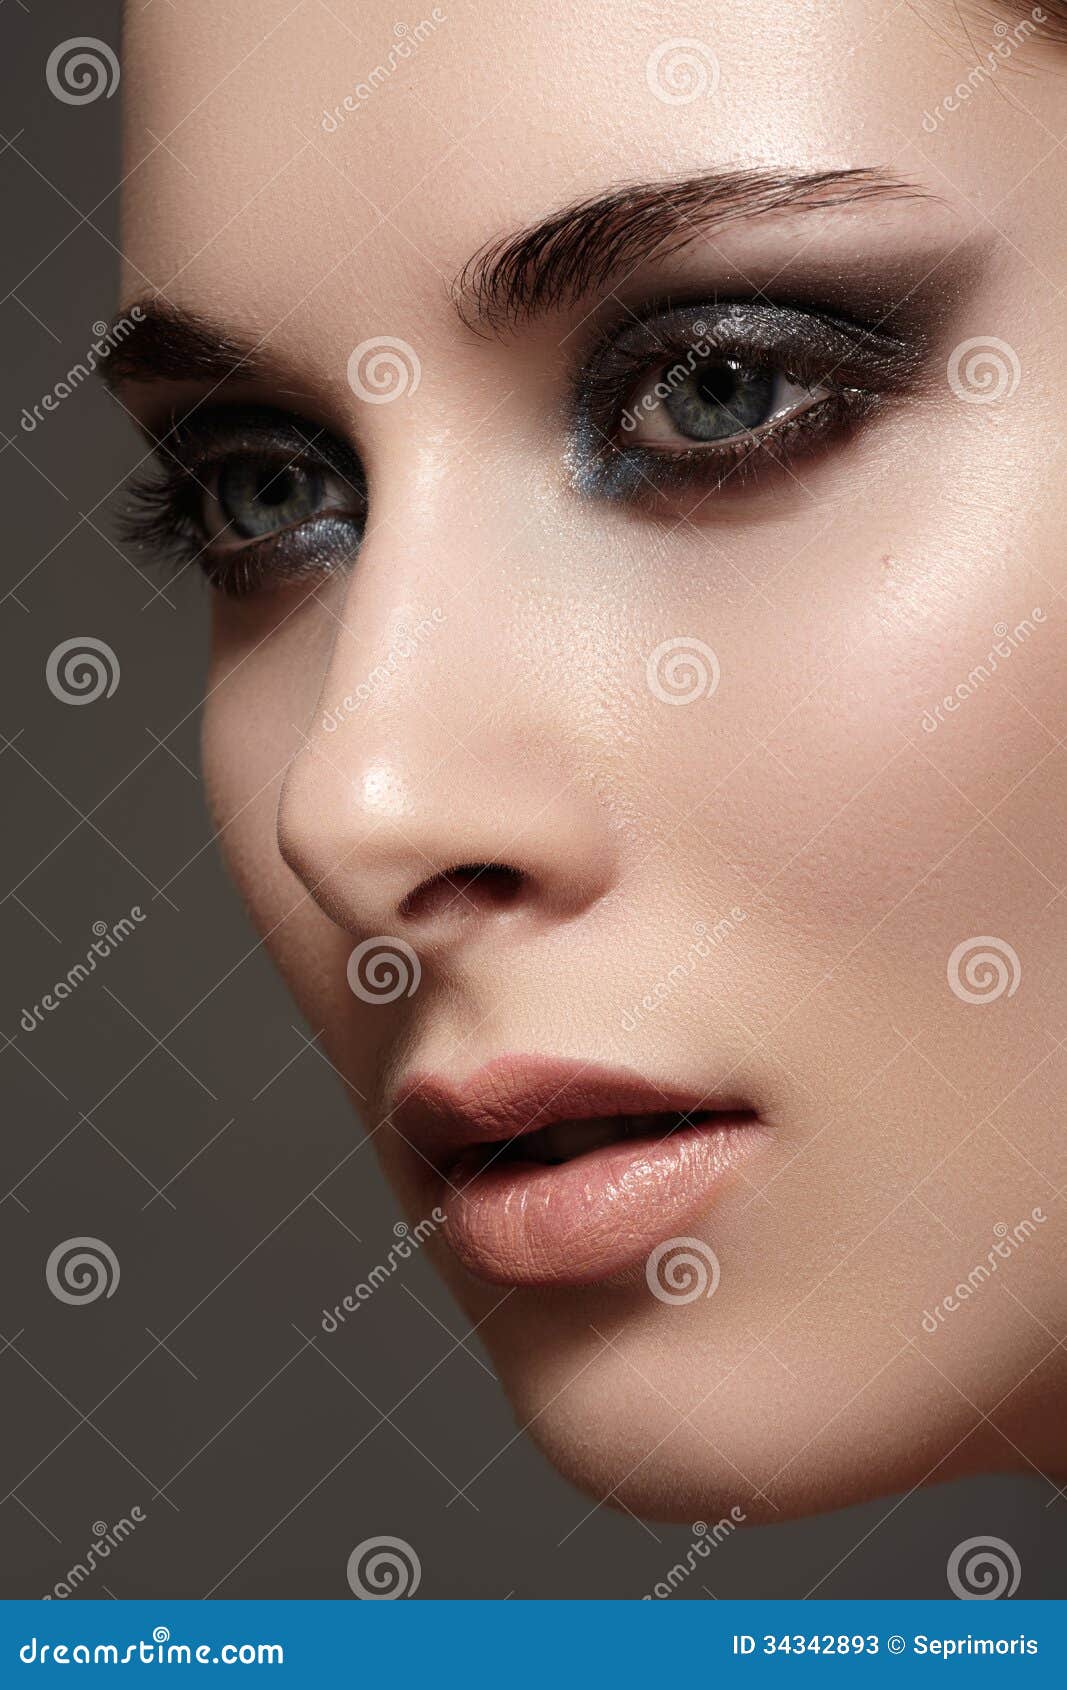 Model with Fashion Catwalk Purity Skin, Hairstyle Stock Image - Image of chic, eyes: 34342893